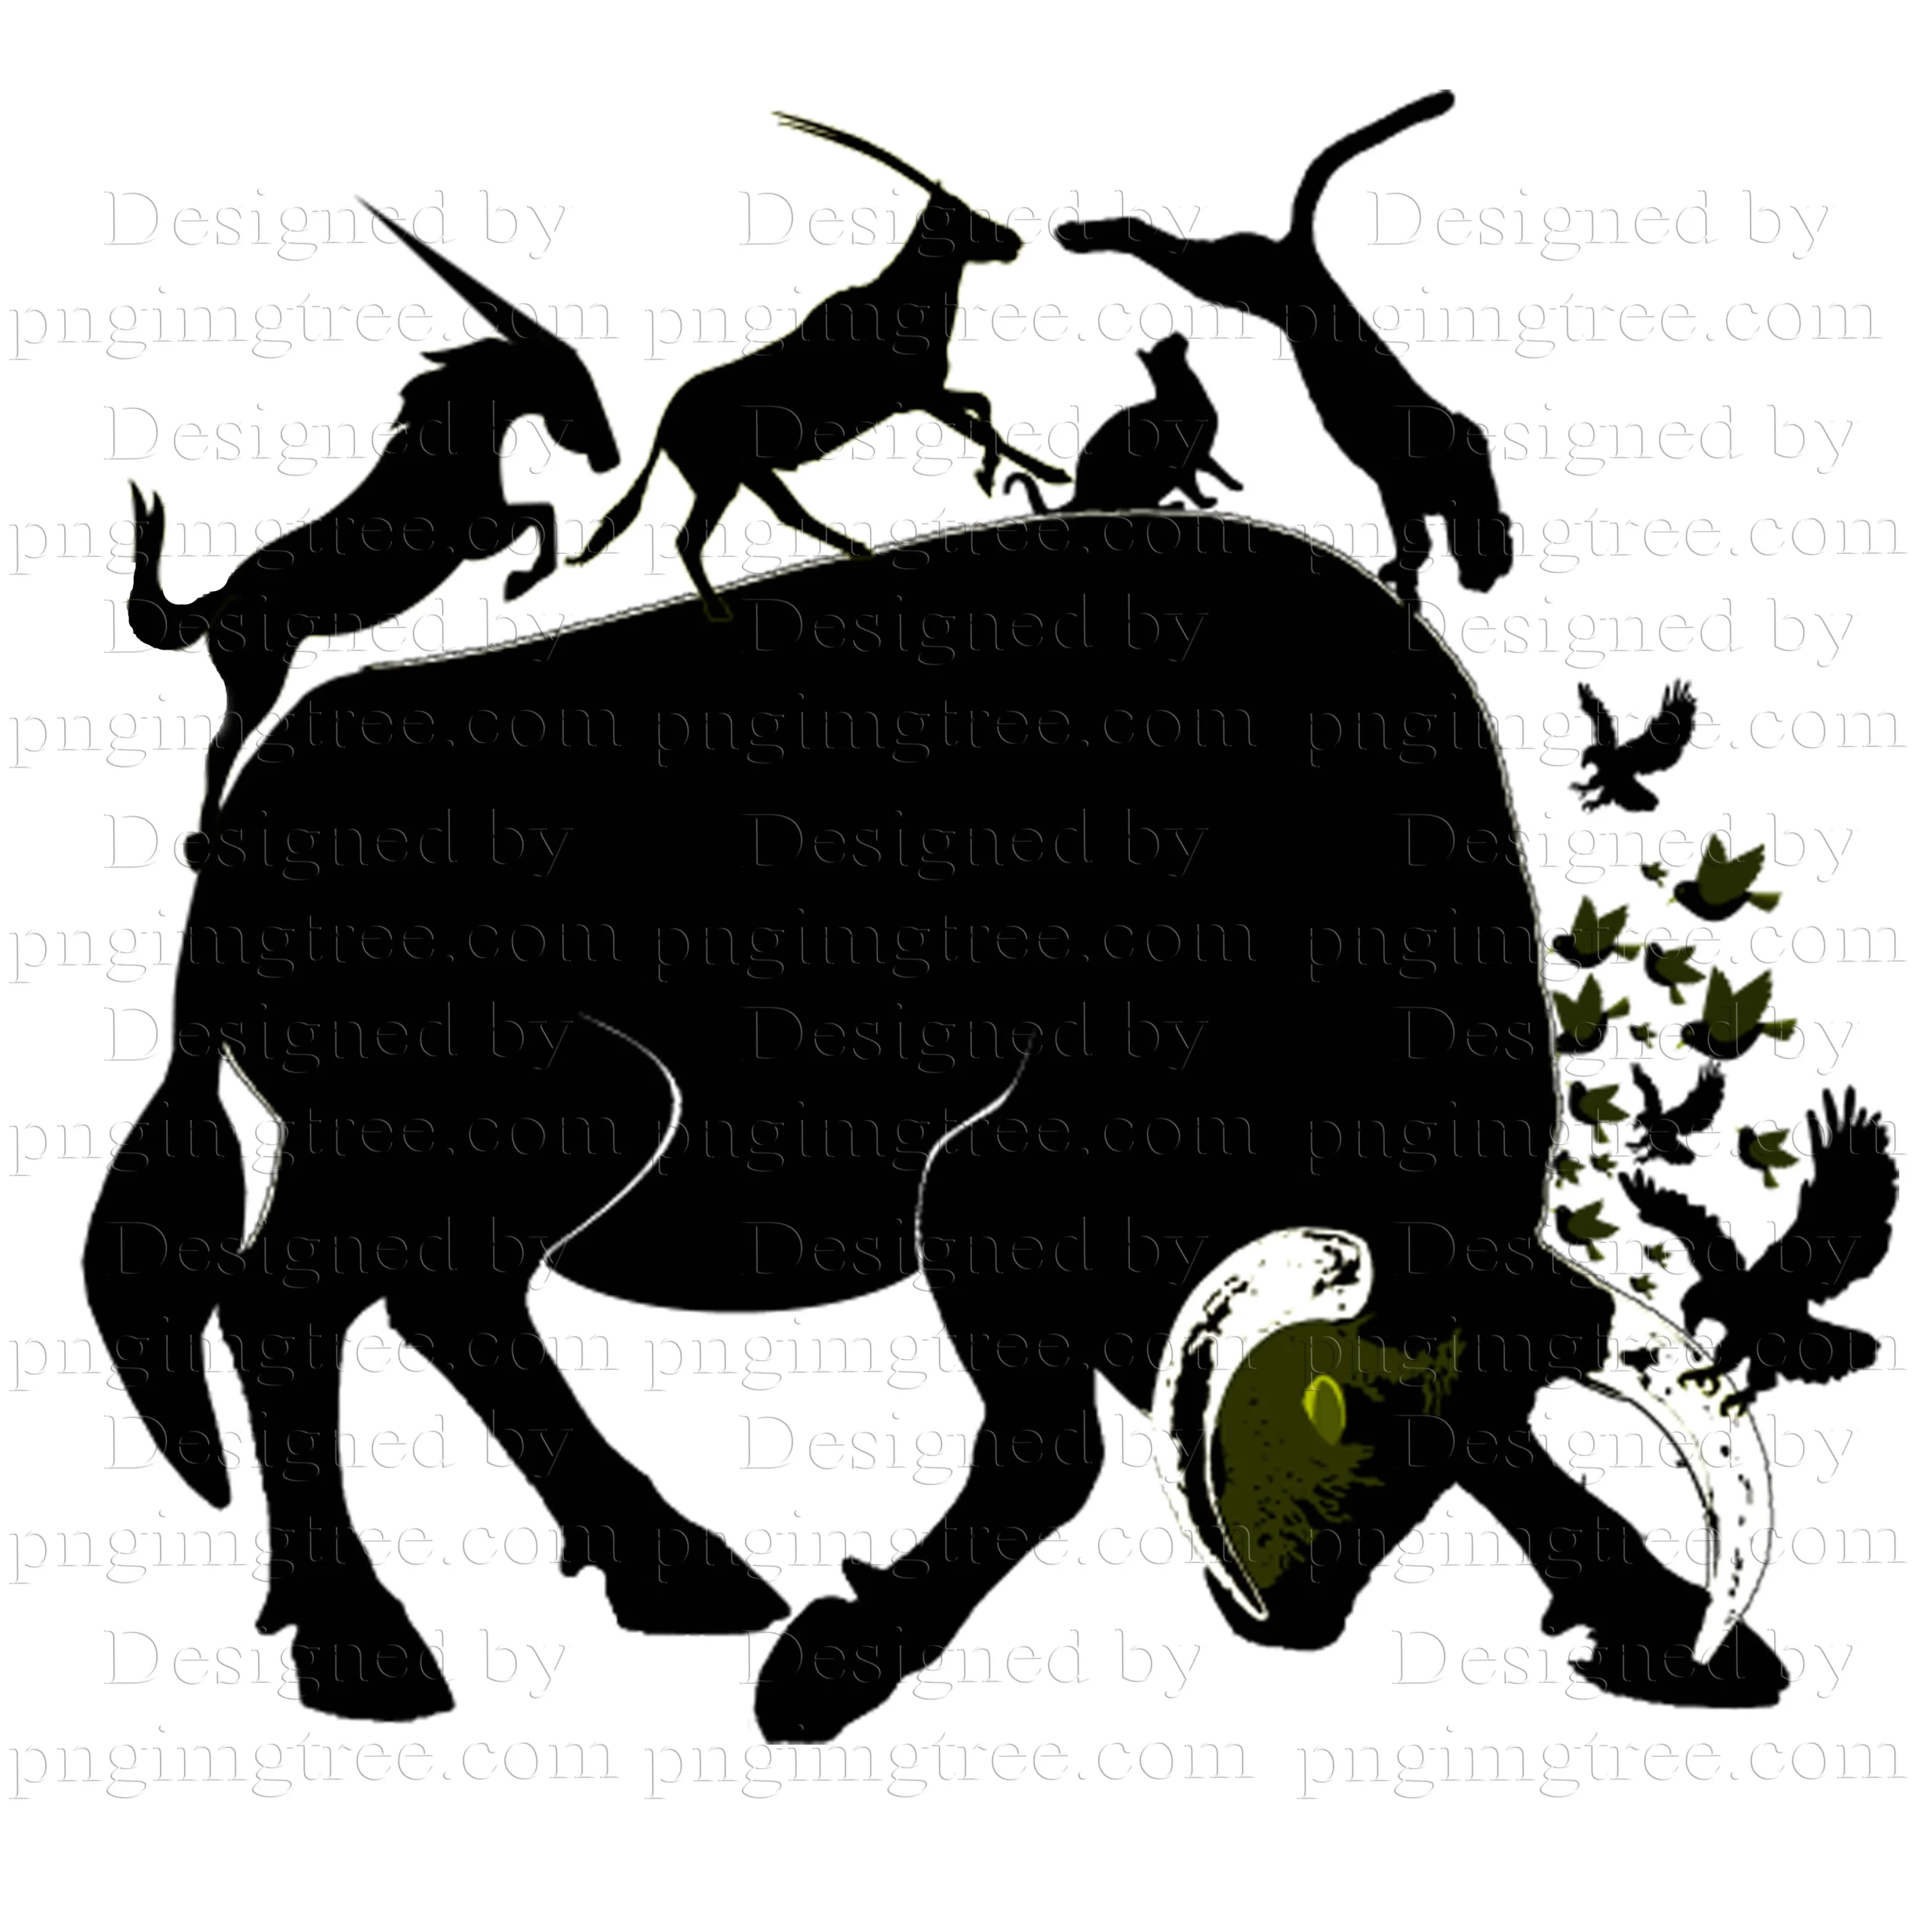 Black Bull Artwork with a Symphony of Animals